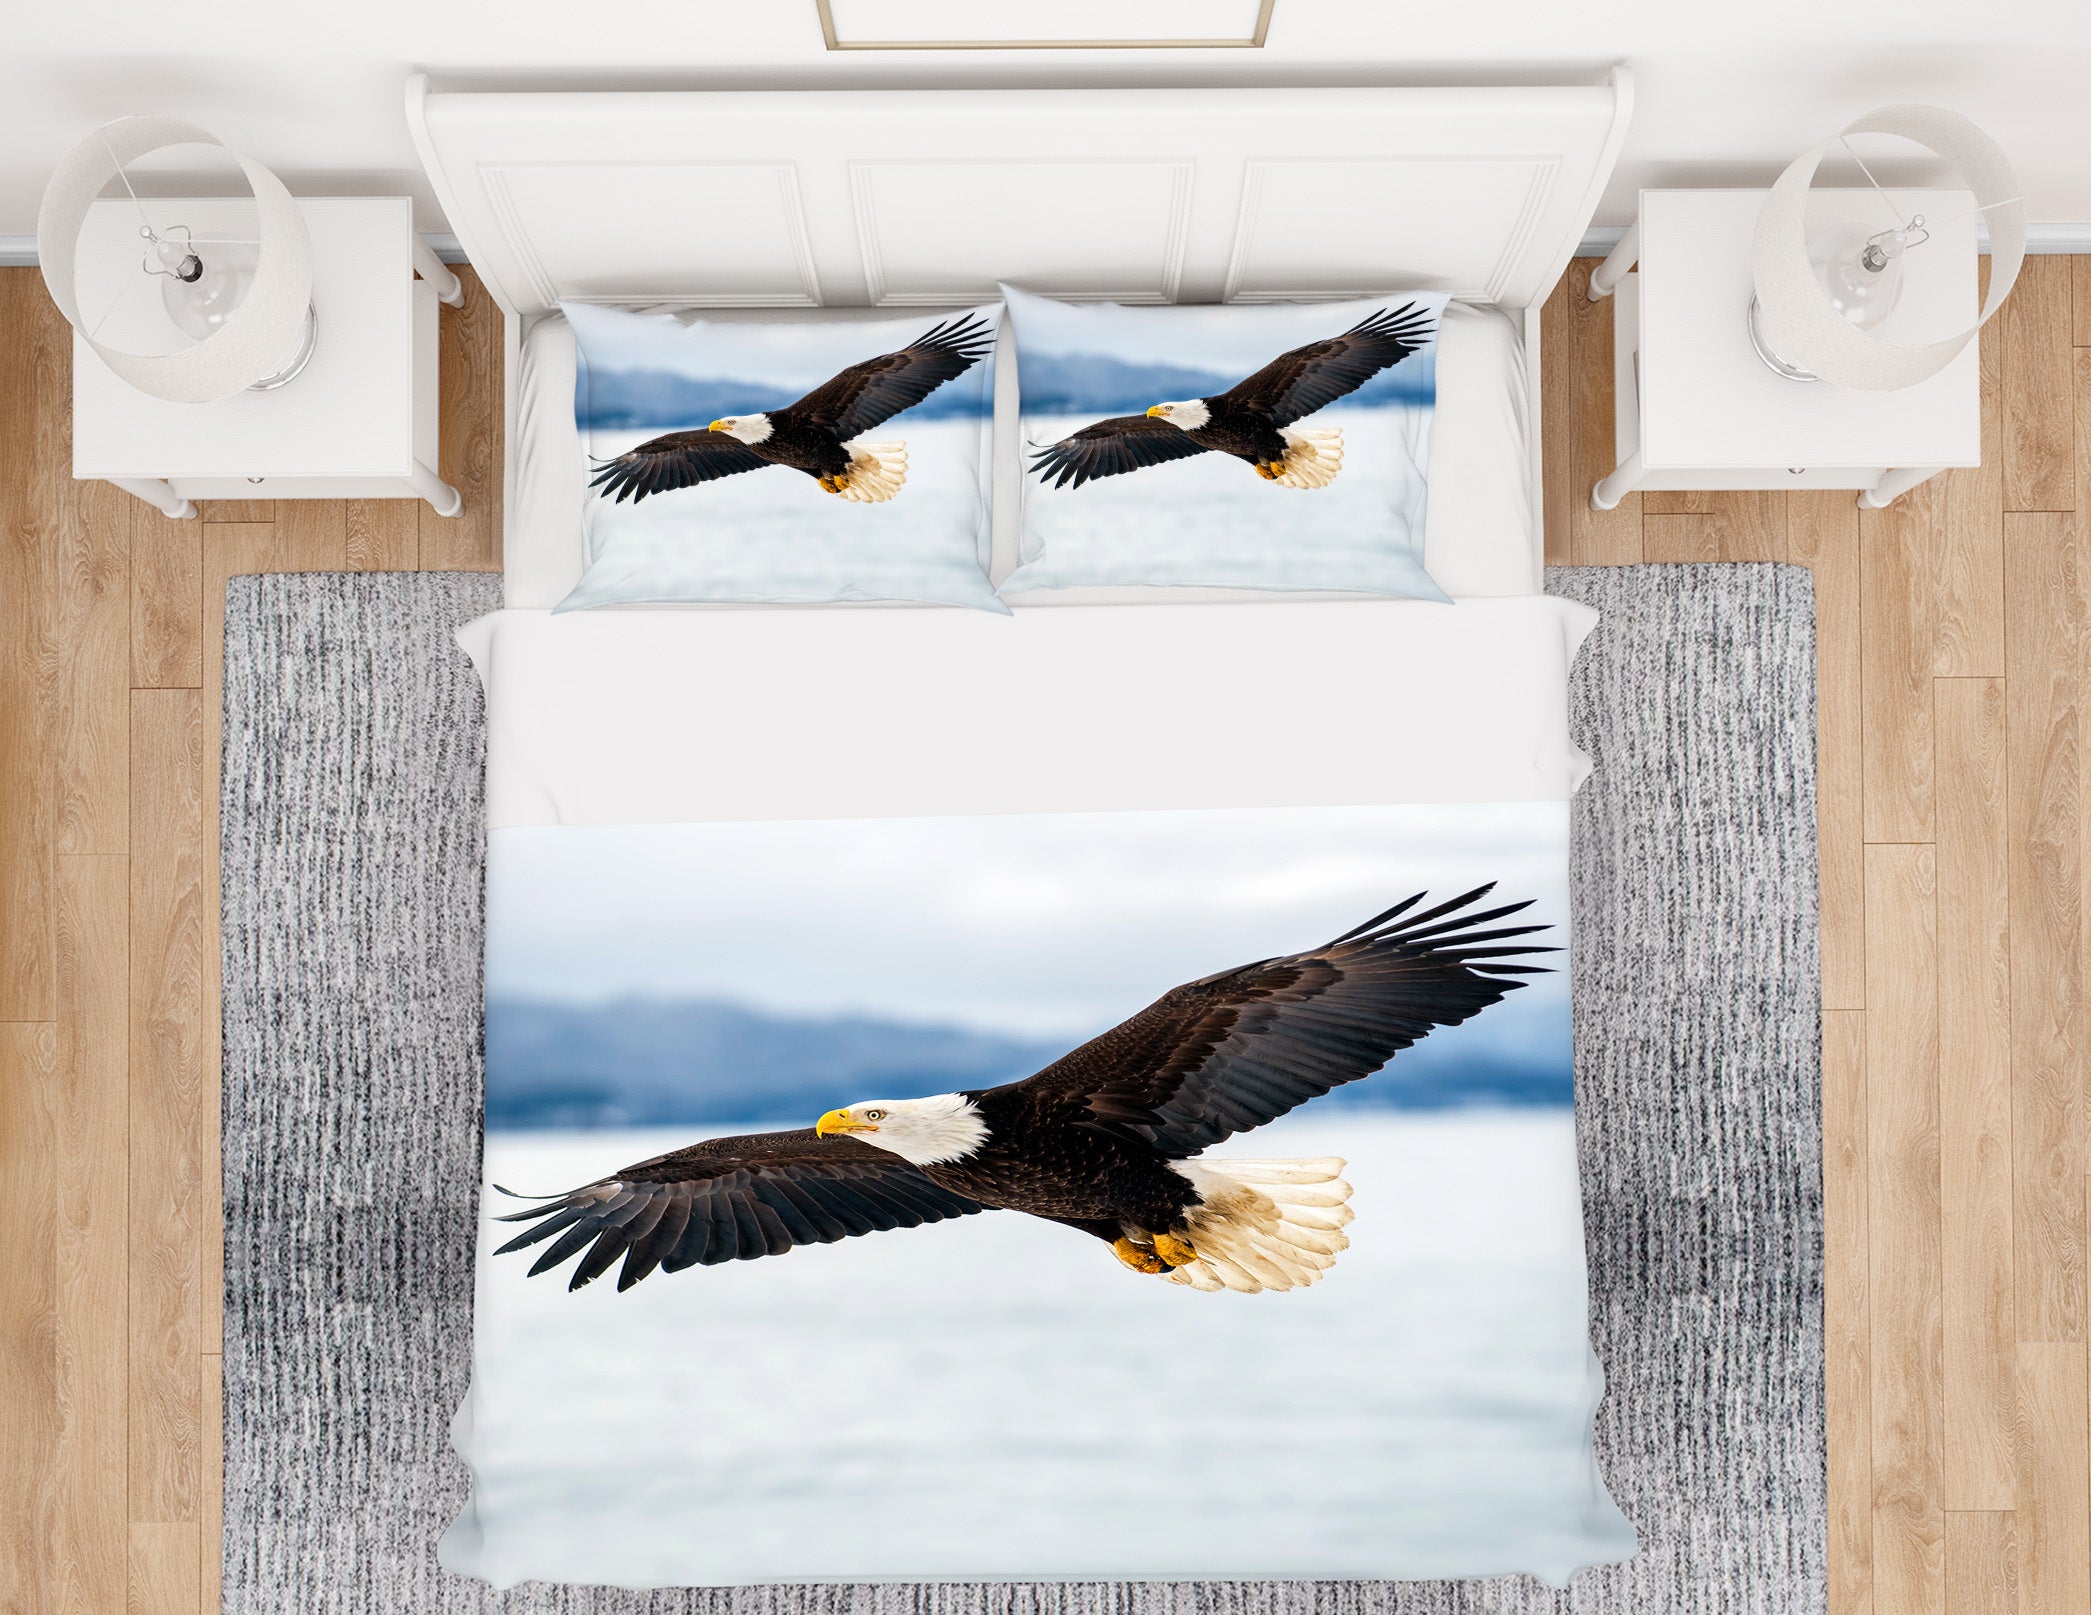 3D Eagle 21042 Bed Pillowcases Quilt